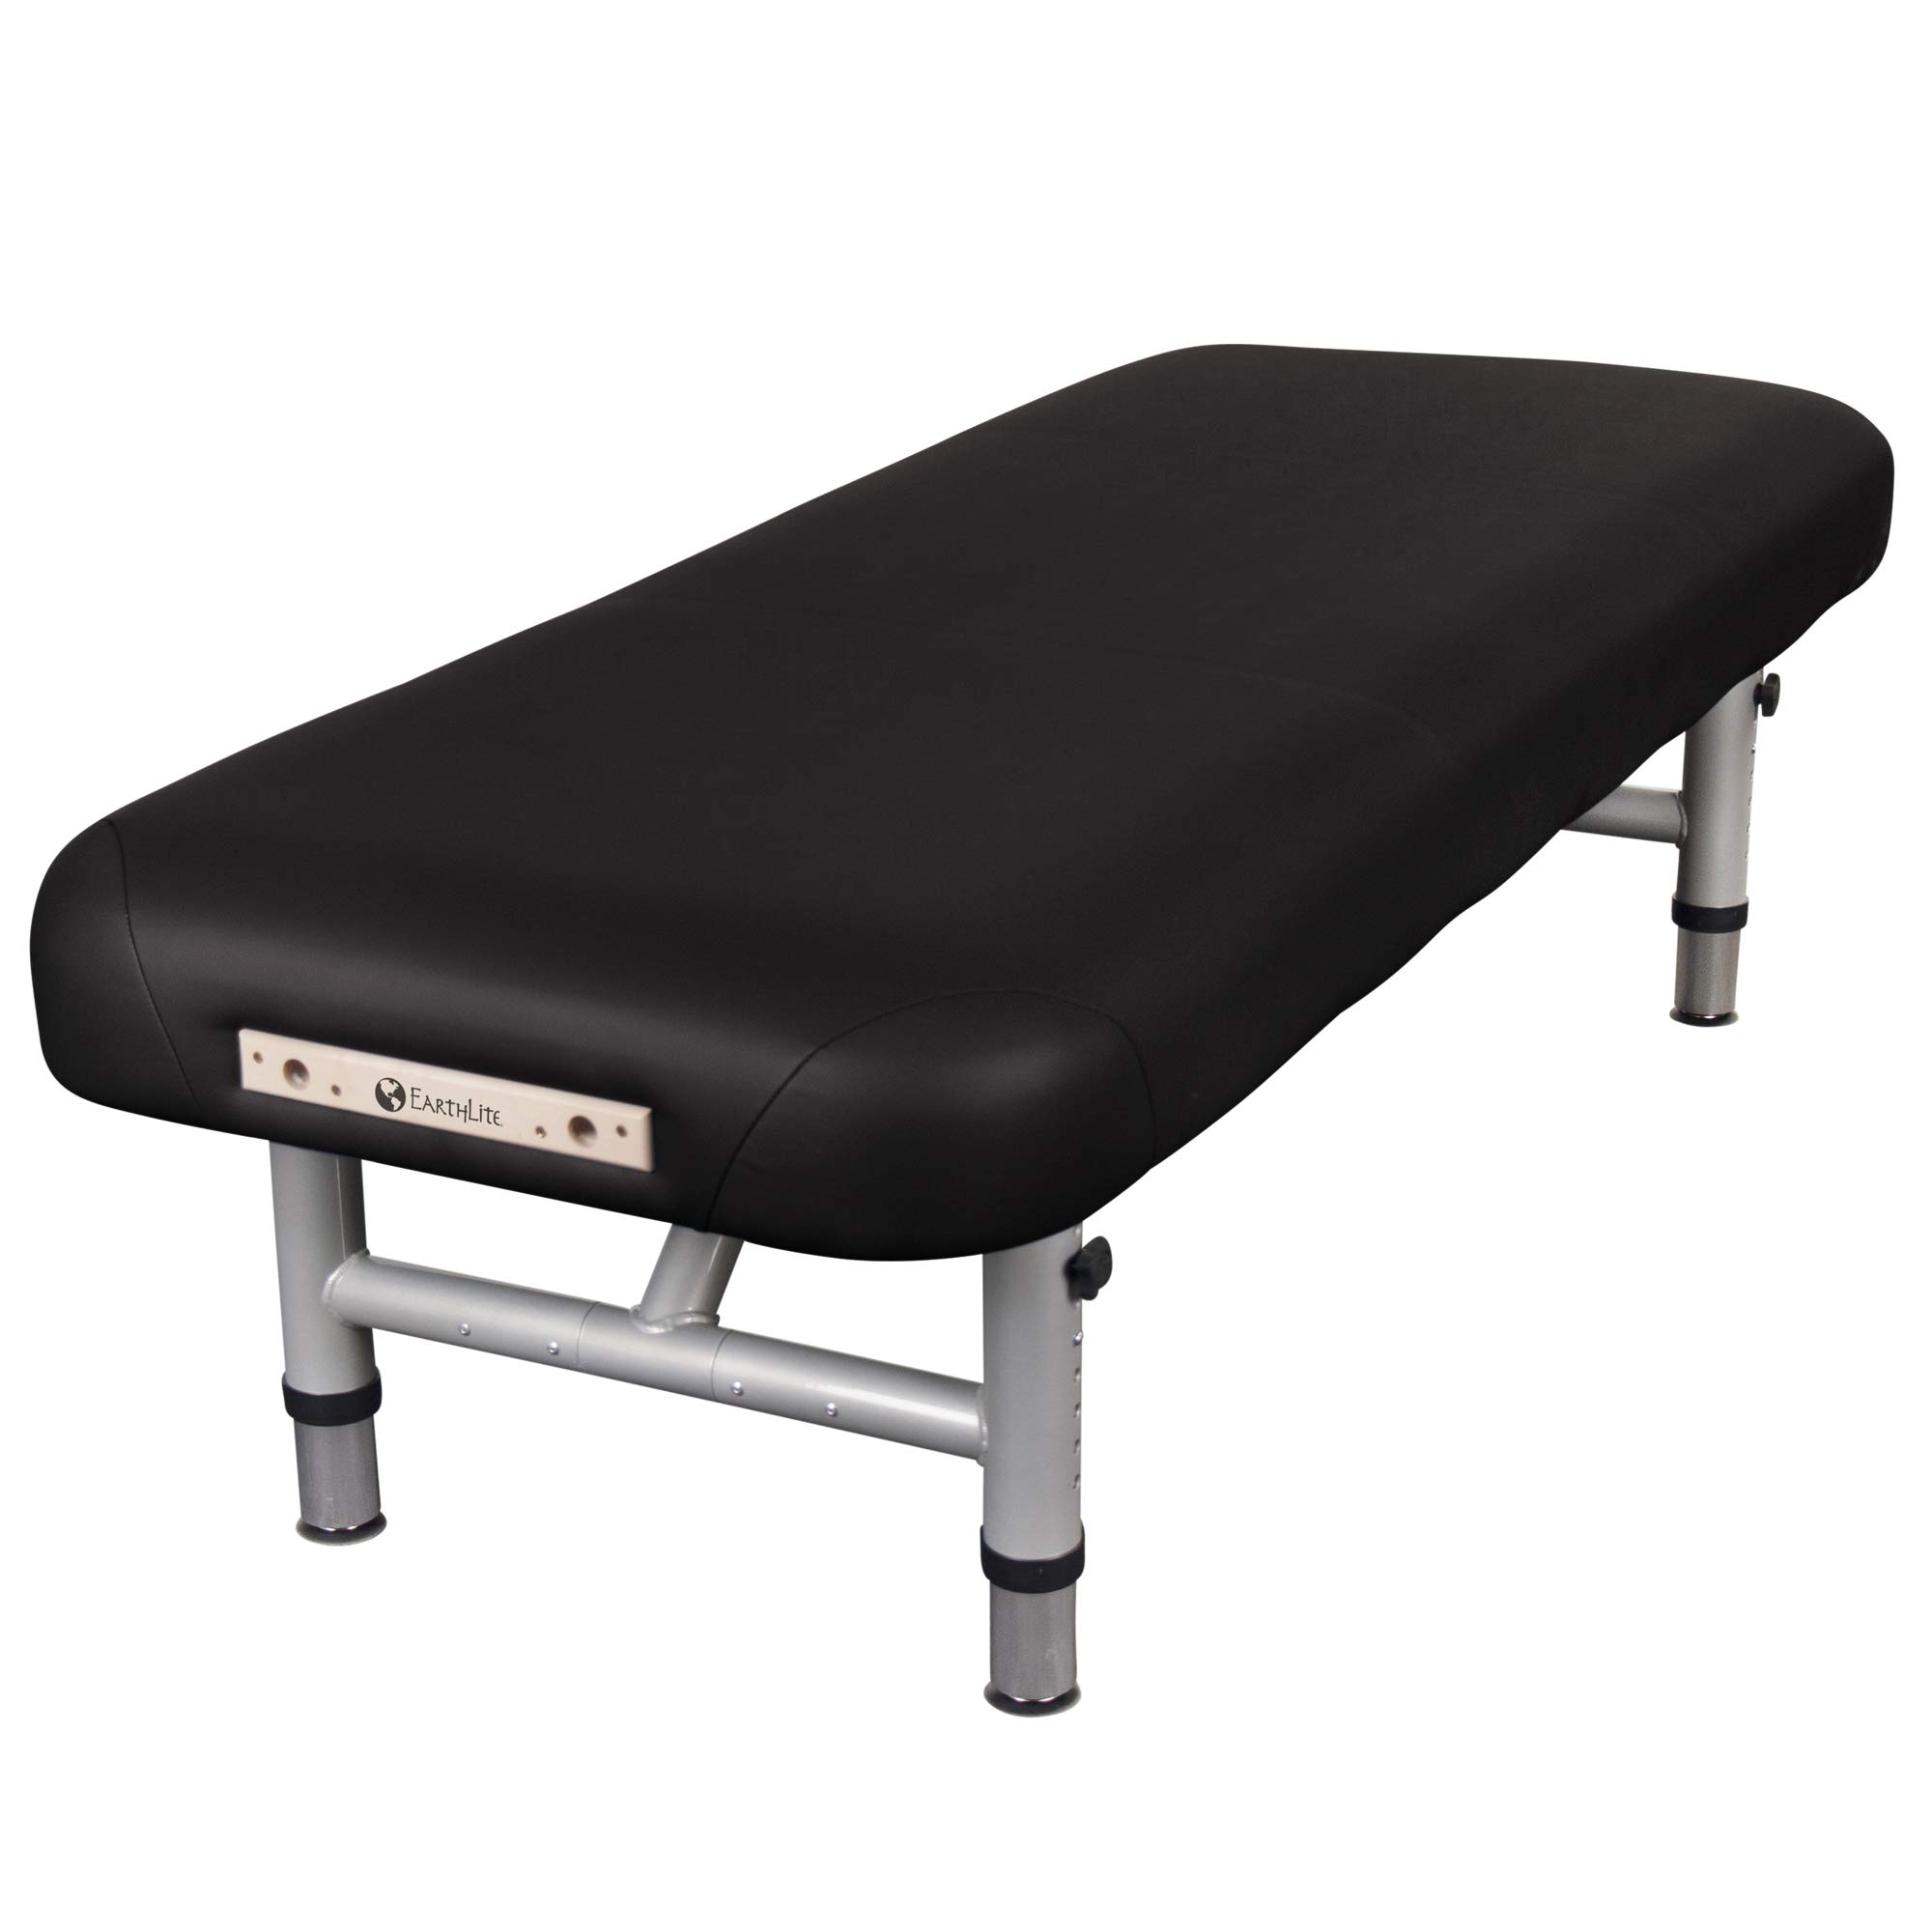 EARTHLITE Physical Therapy Table YOSEMITE 30 – Extra Wide, Adjustable Low Height (20-26.5”) Aluminum Exam & Massage Table, Face Cradle & Face Pillow (30x73”)